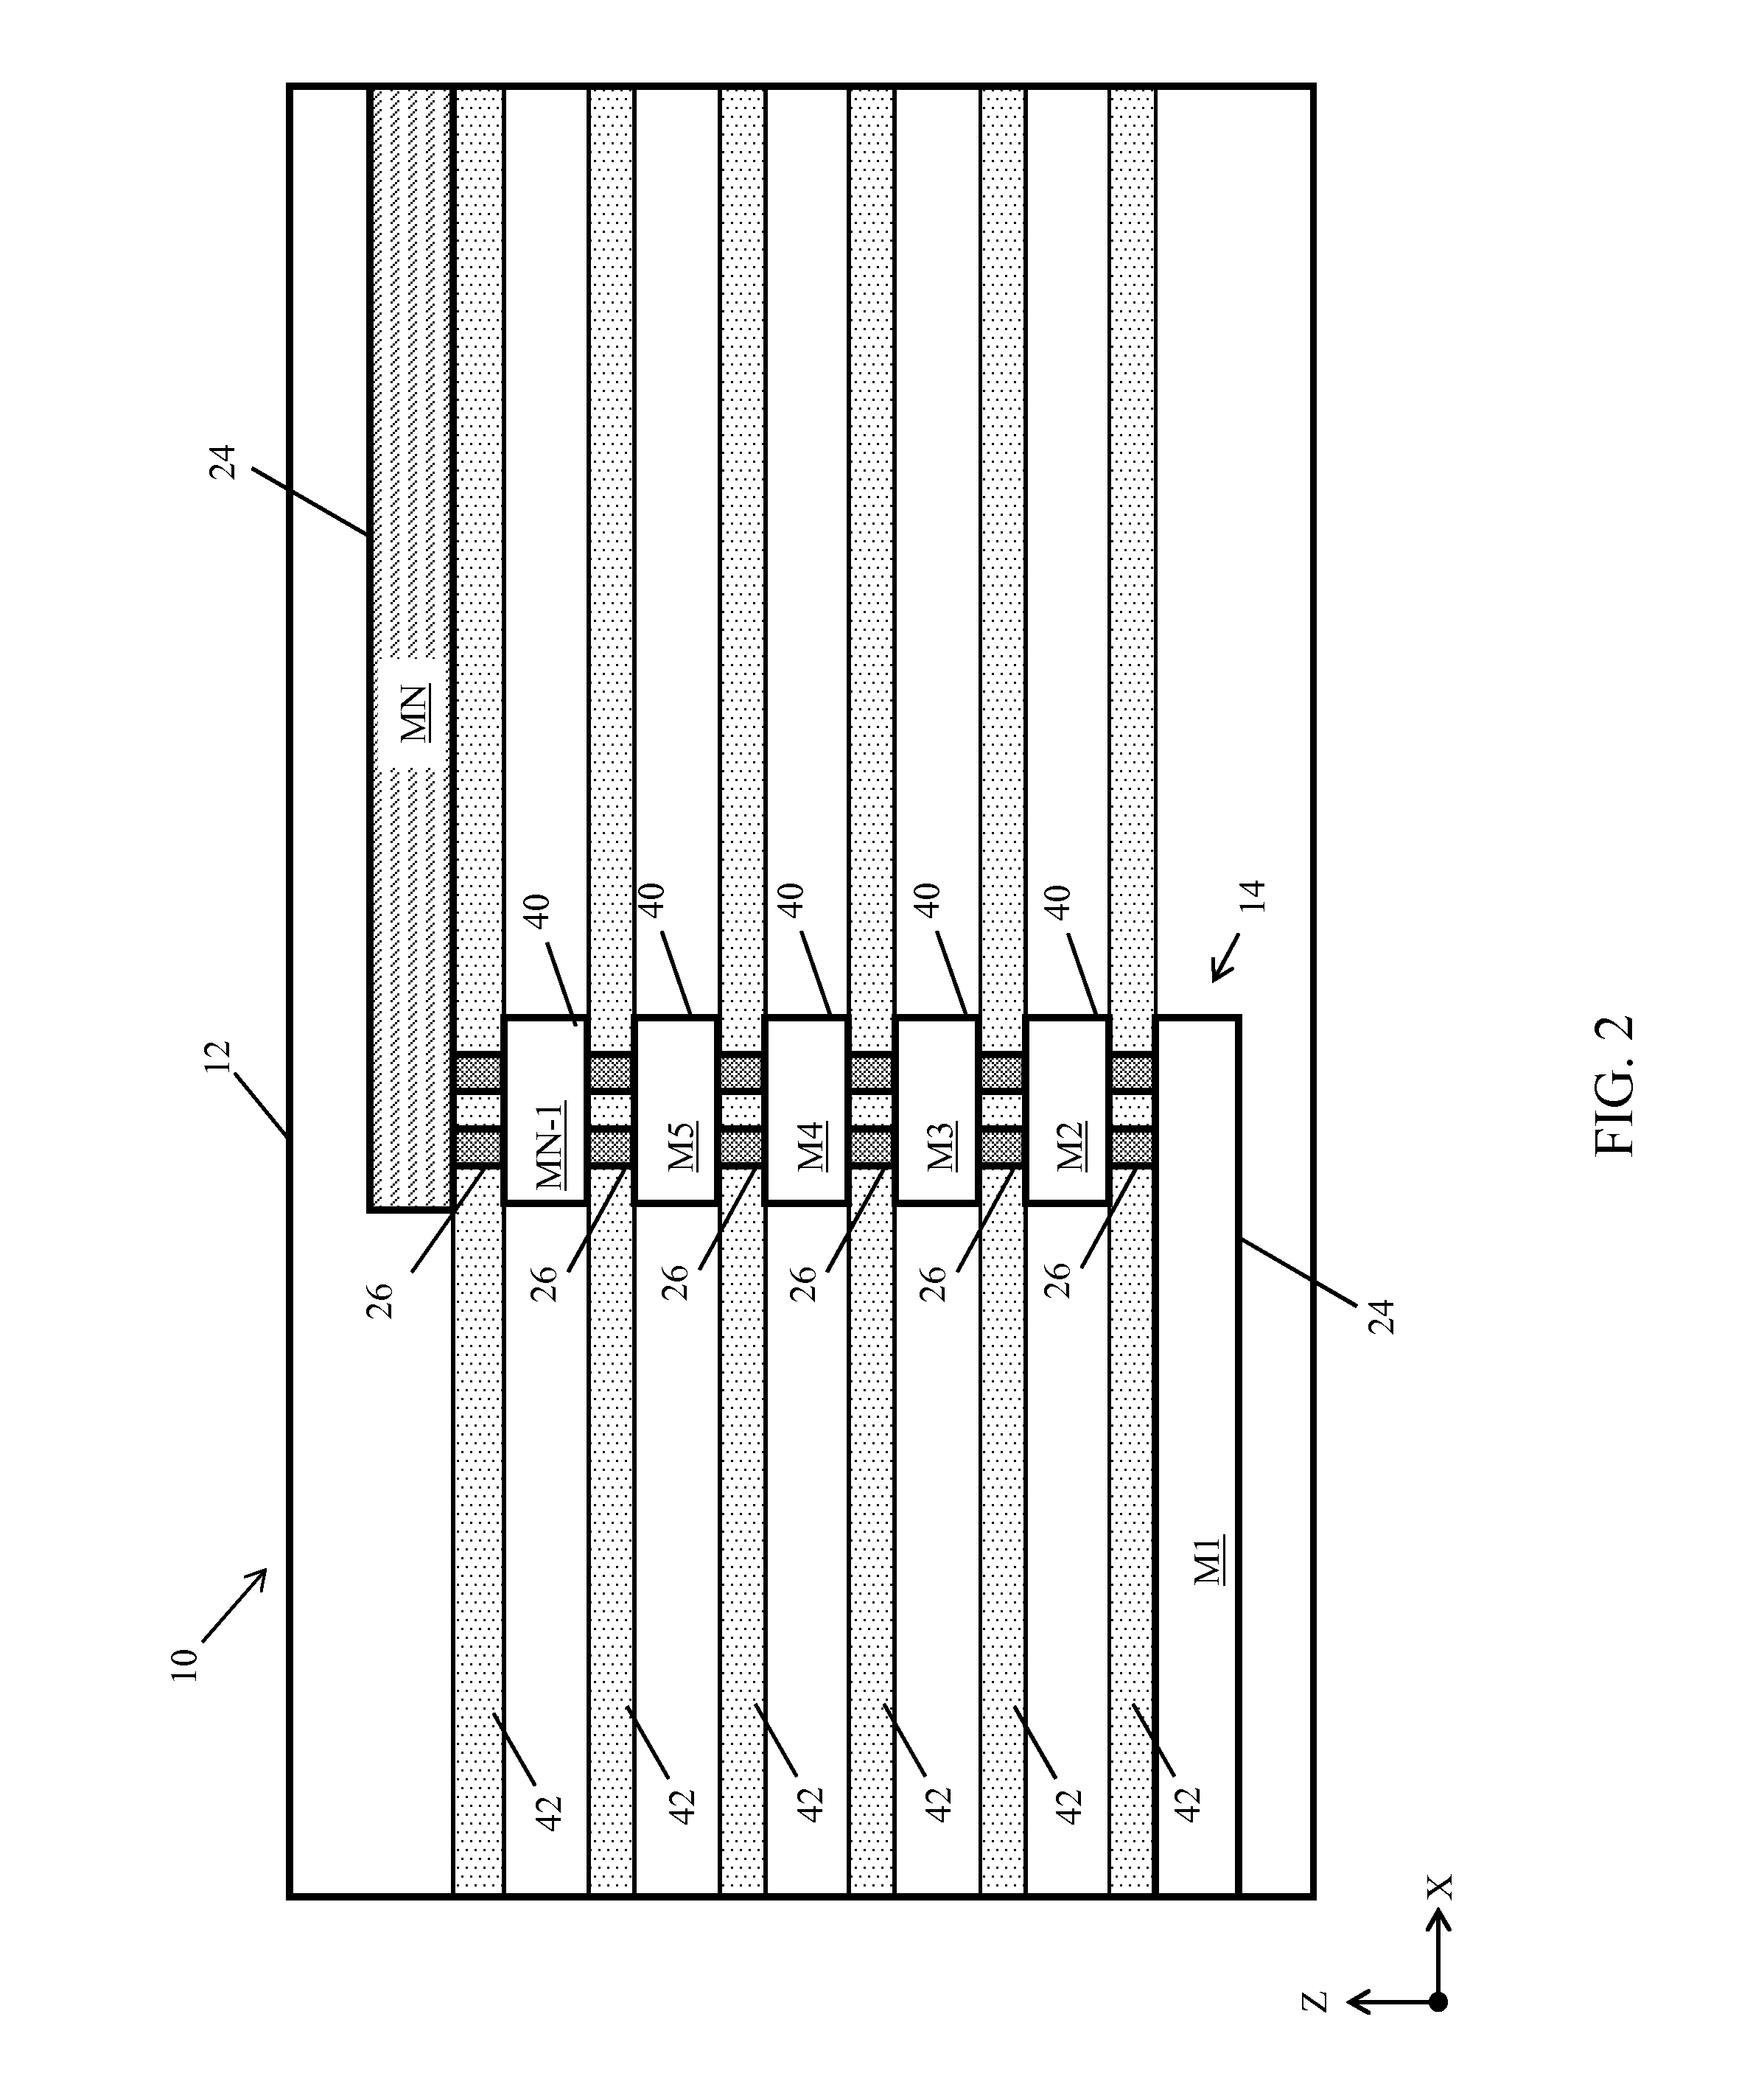 Integrated circuit (IC) test structure with monitor chain and test wires